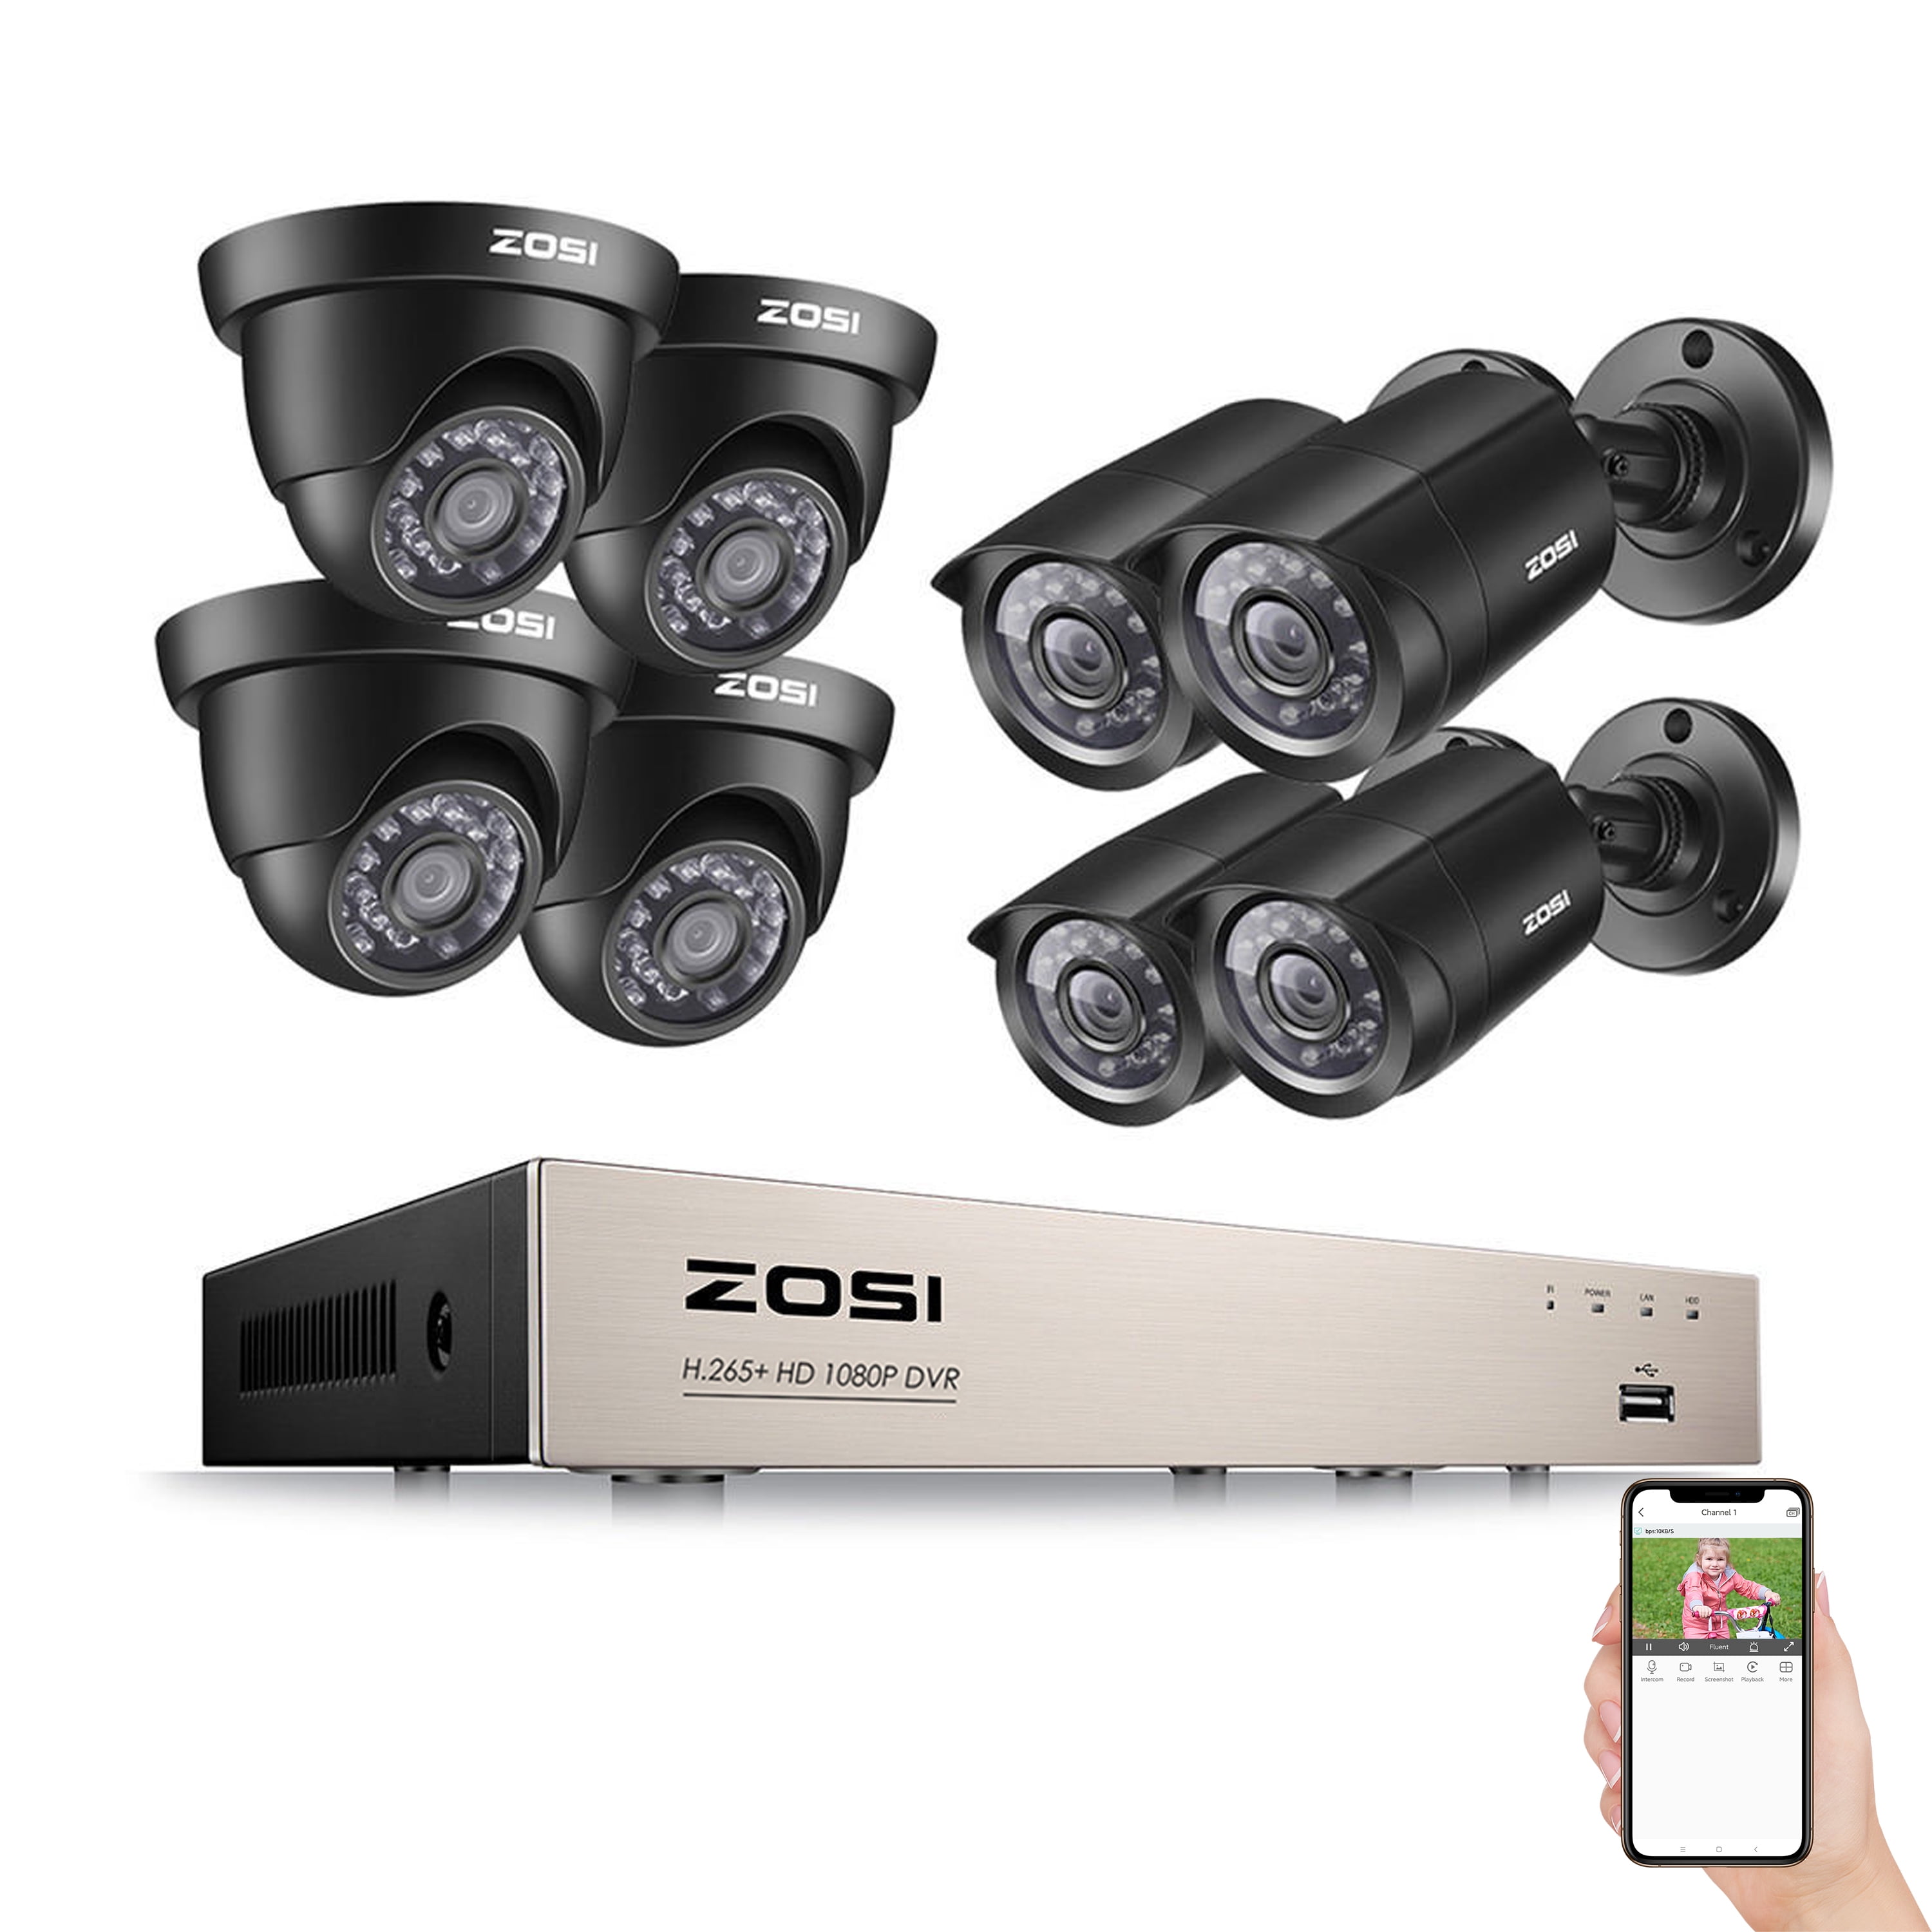 ZOSI 8CH 1080N HDMI DVR 720p Outdoor CCTV Home Security Camera System 1TB HDD 